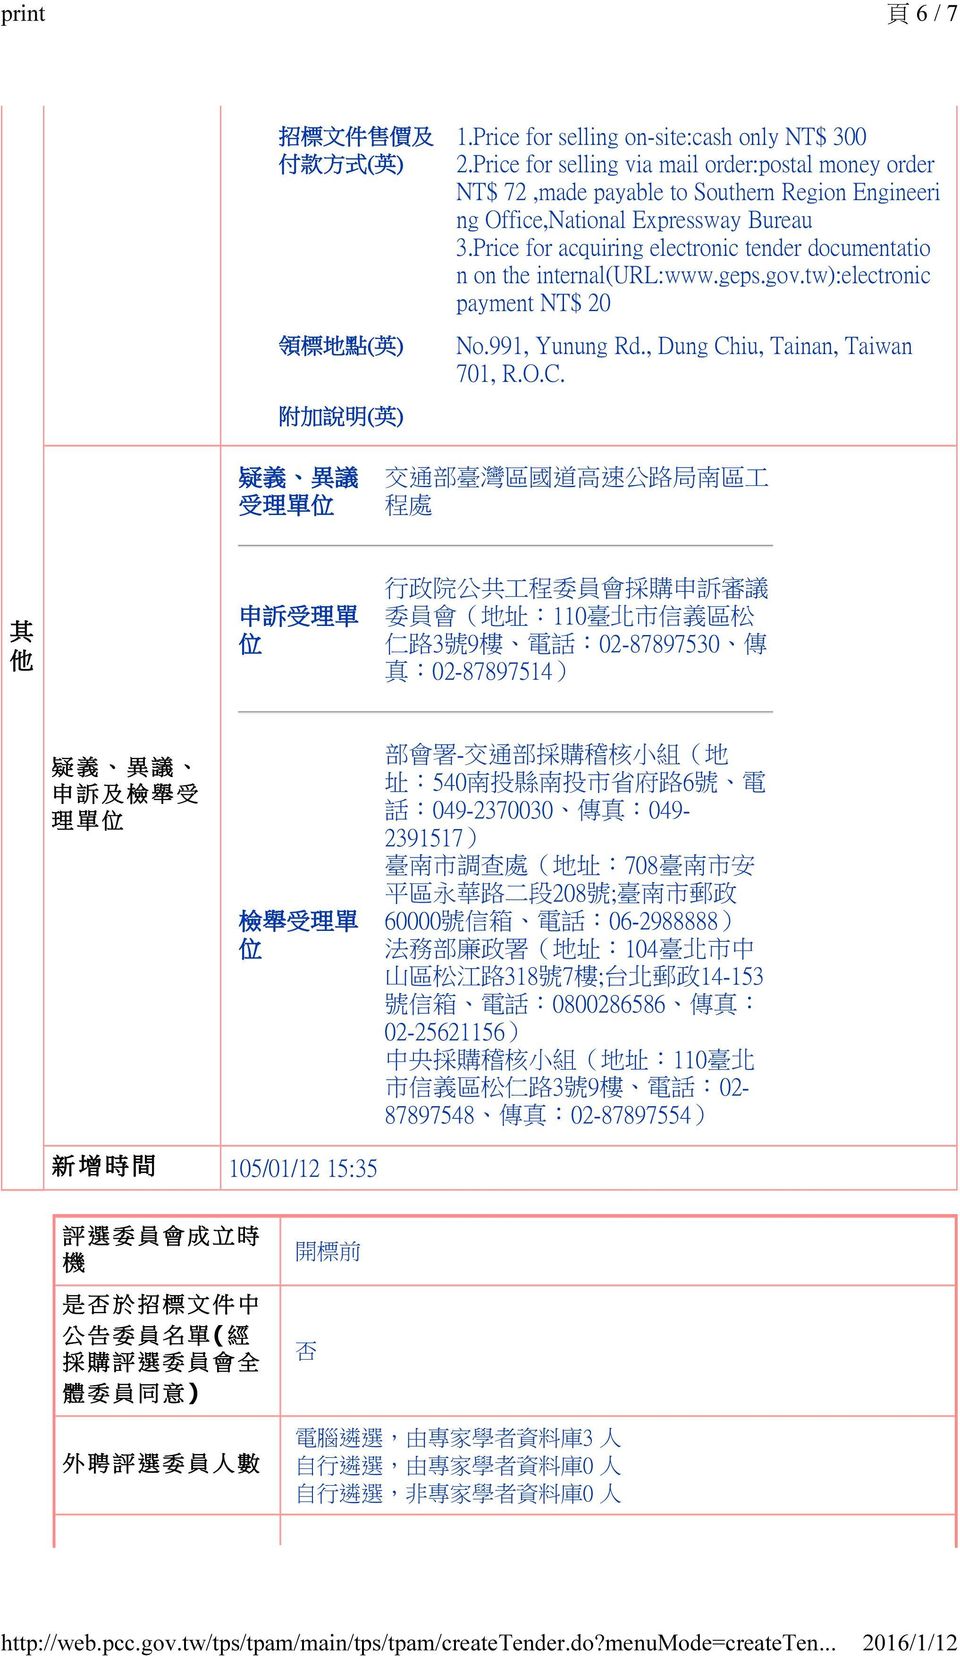 Price for acquiring electronic tender documentatio n on the internal(url:www.geps.gov.tw):electronic payment NT$ 20 No.991, Yunung Rd., Dung Ch